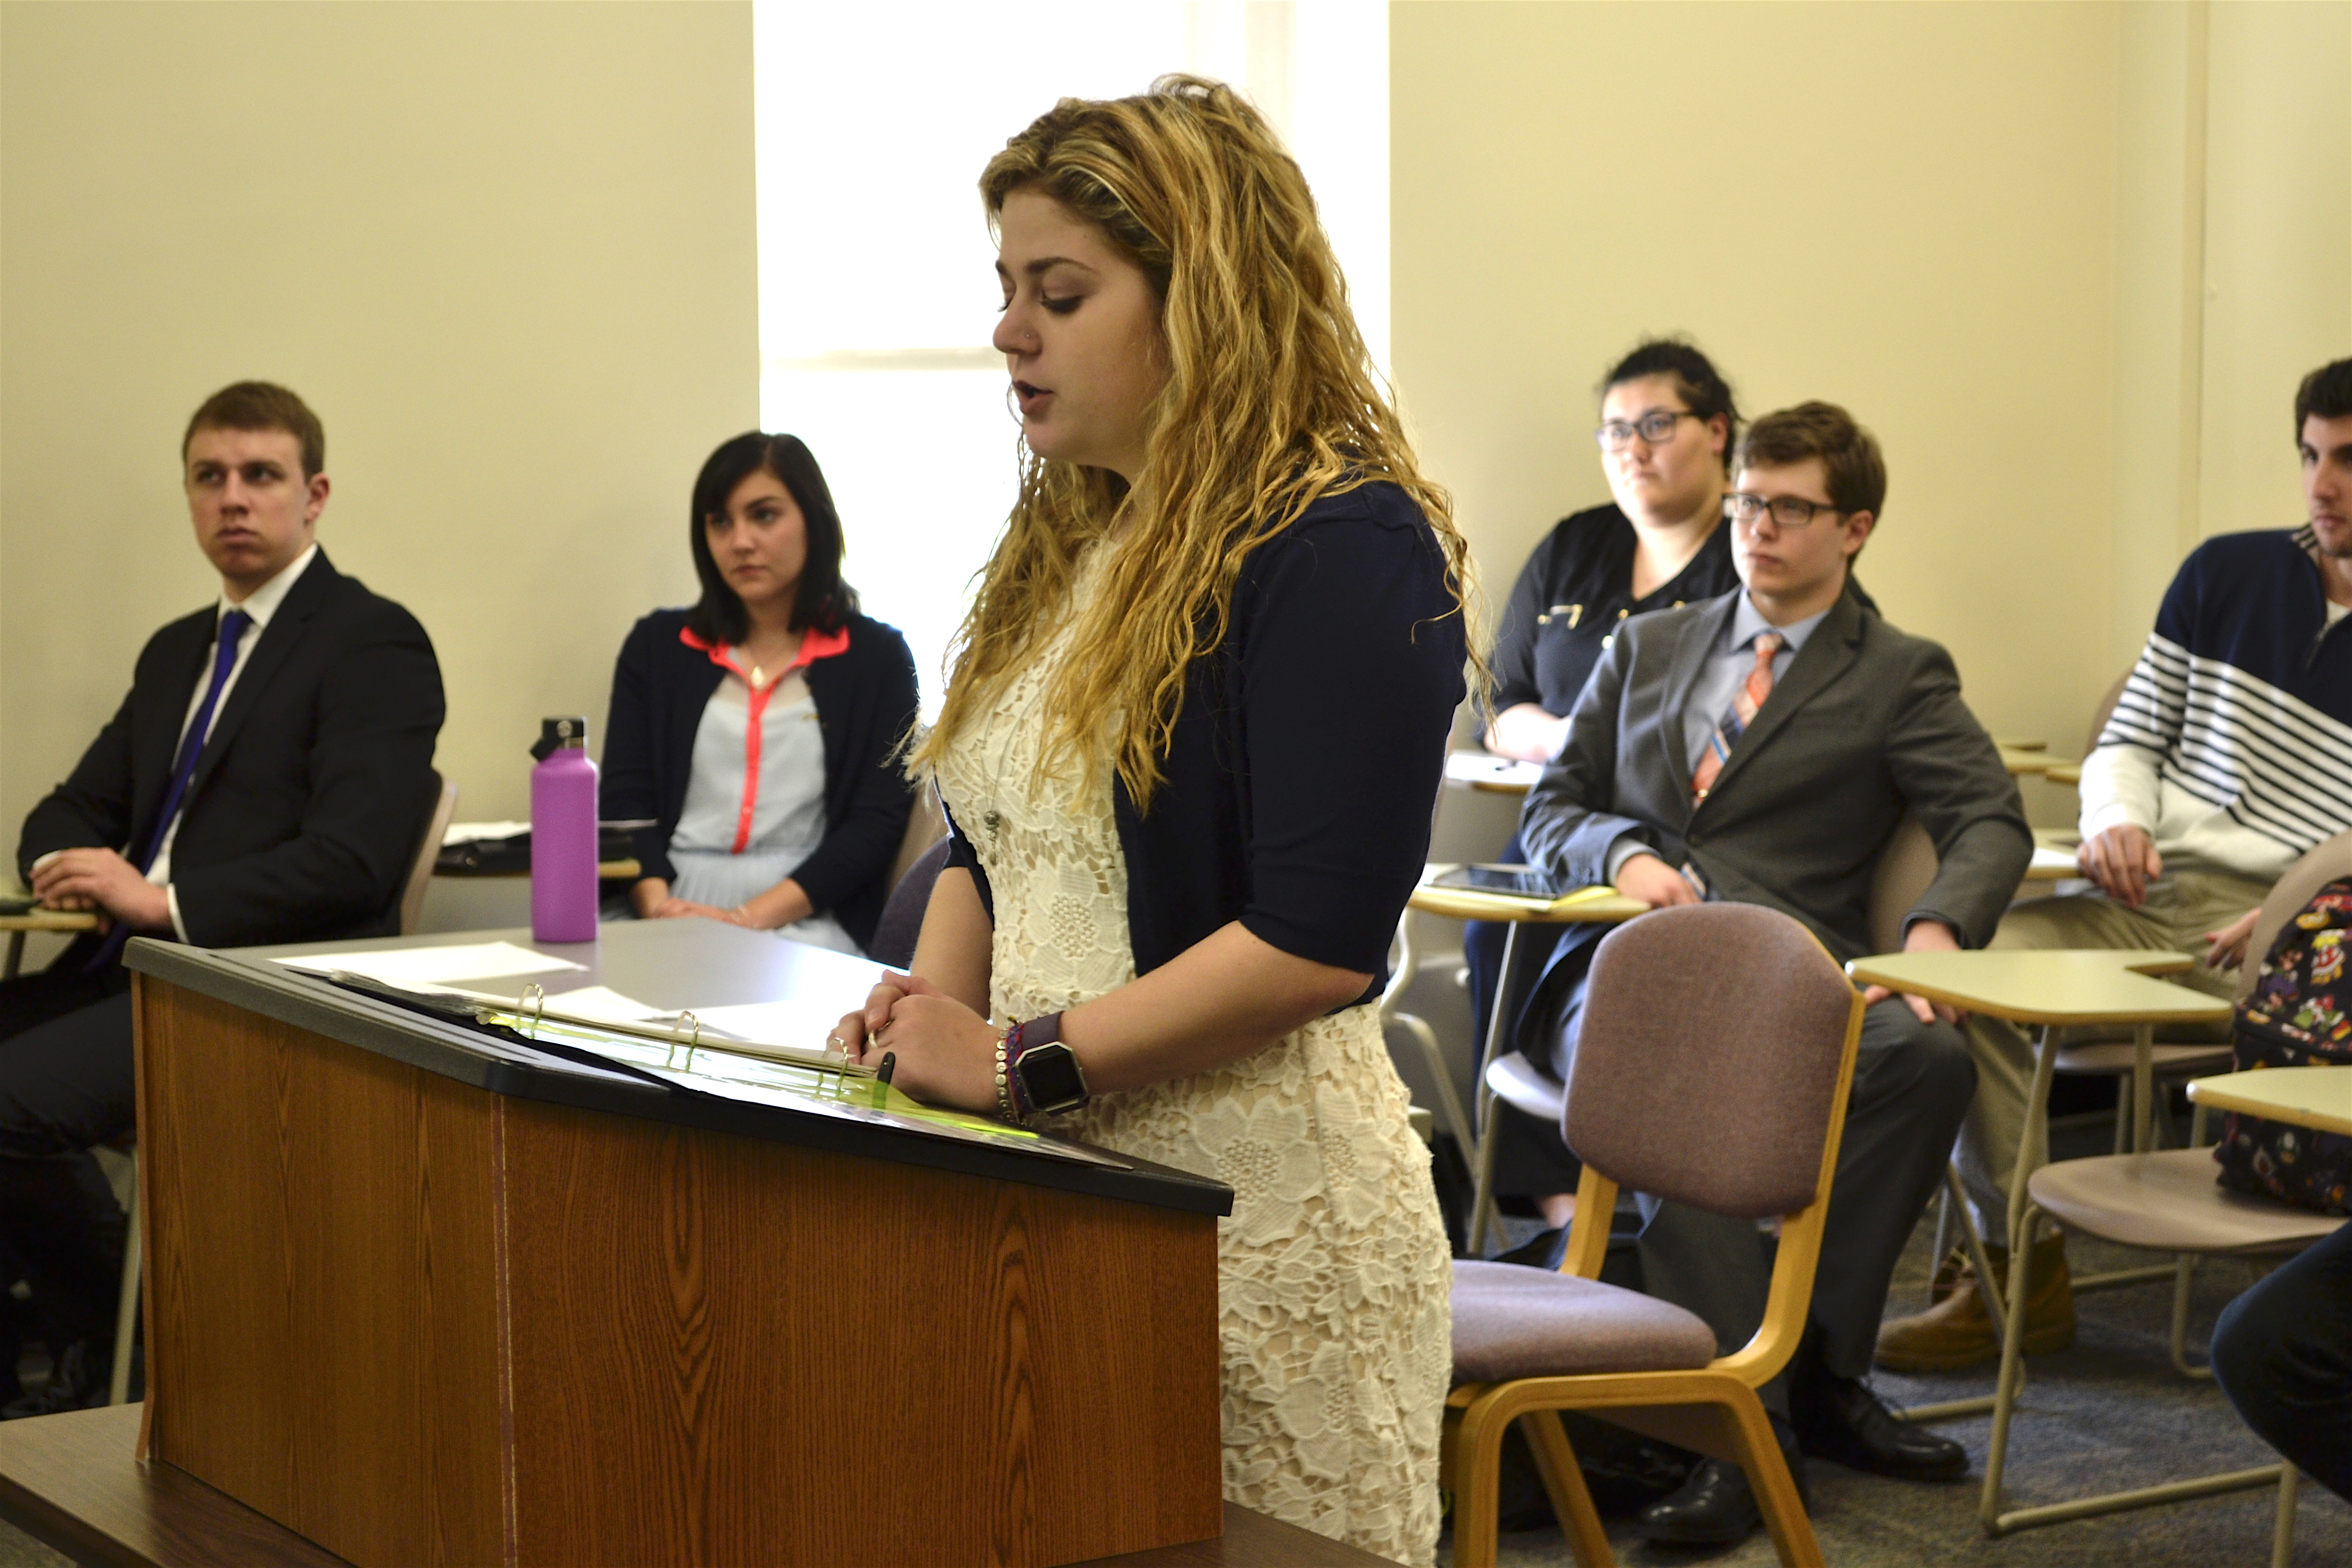 Student standing at a podium presenting to class